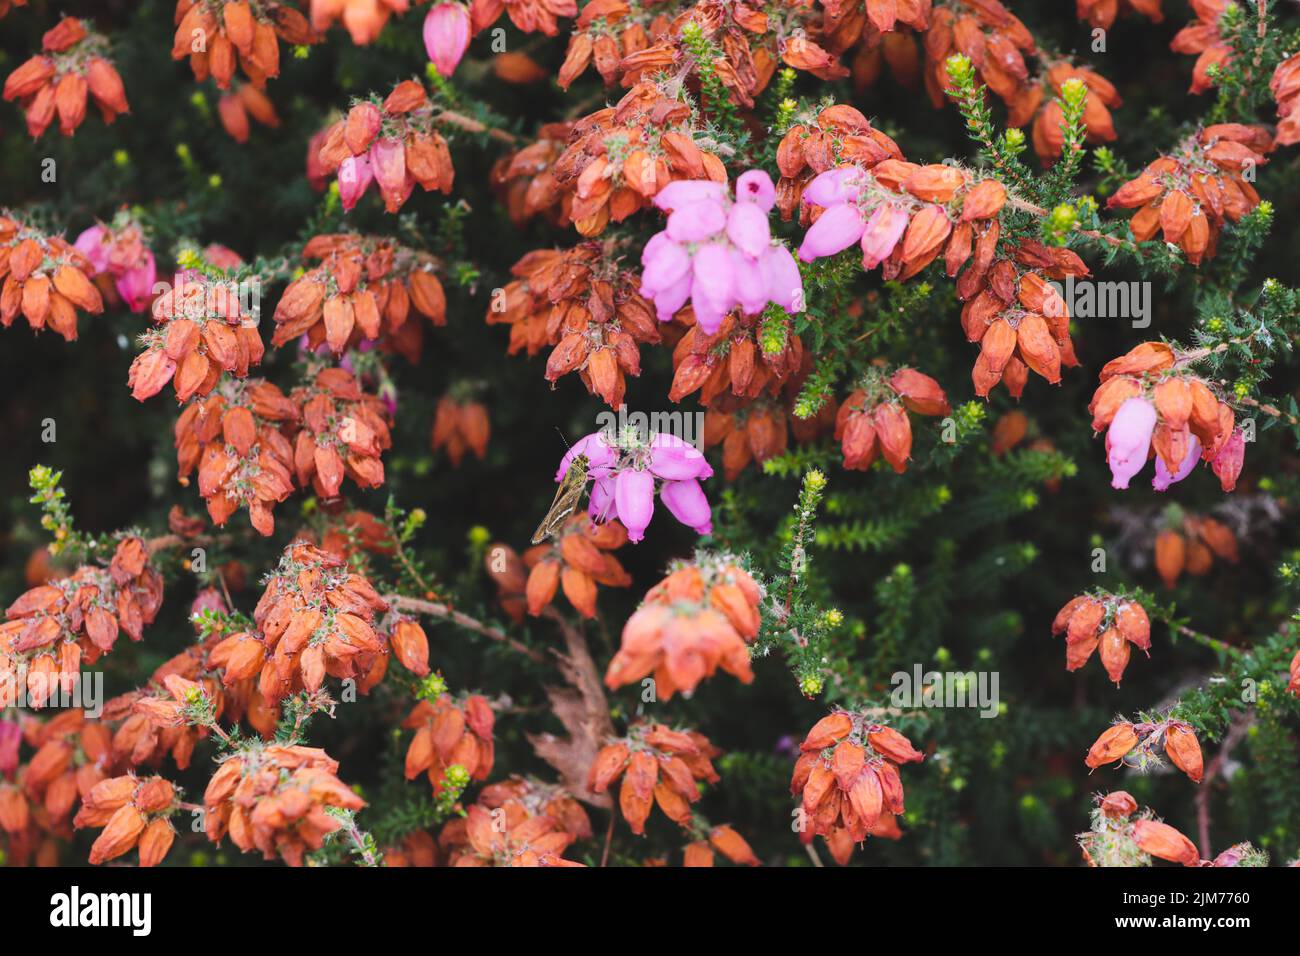 A closeup of red and purple Erica ciliaris plant flowers Stock Photo